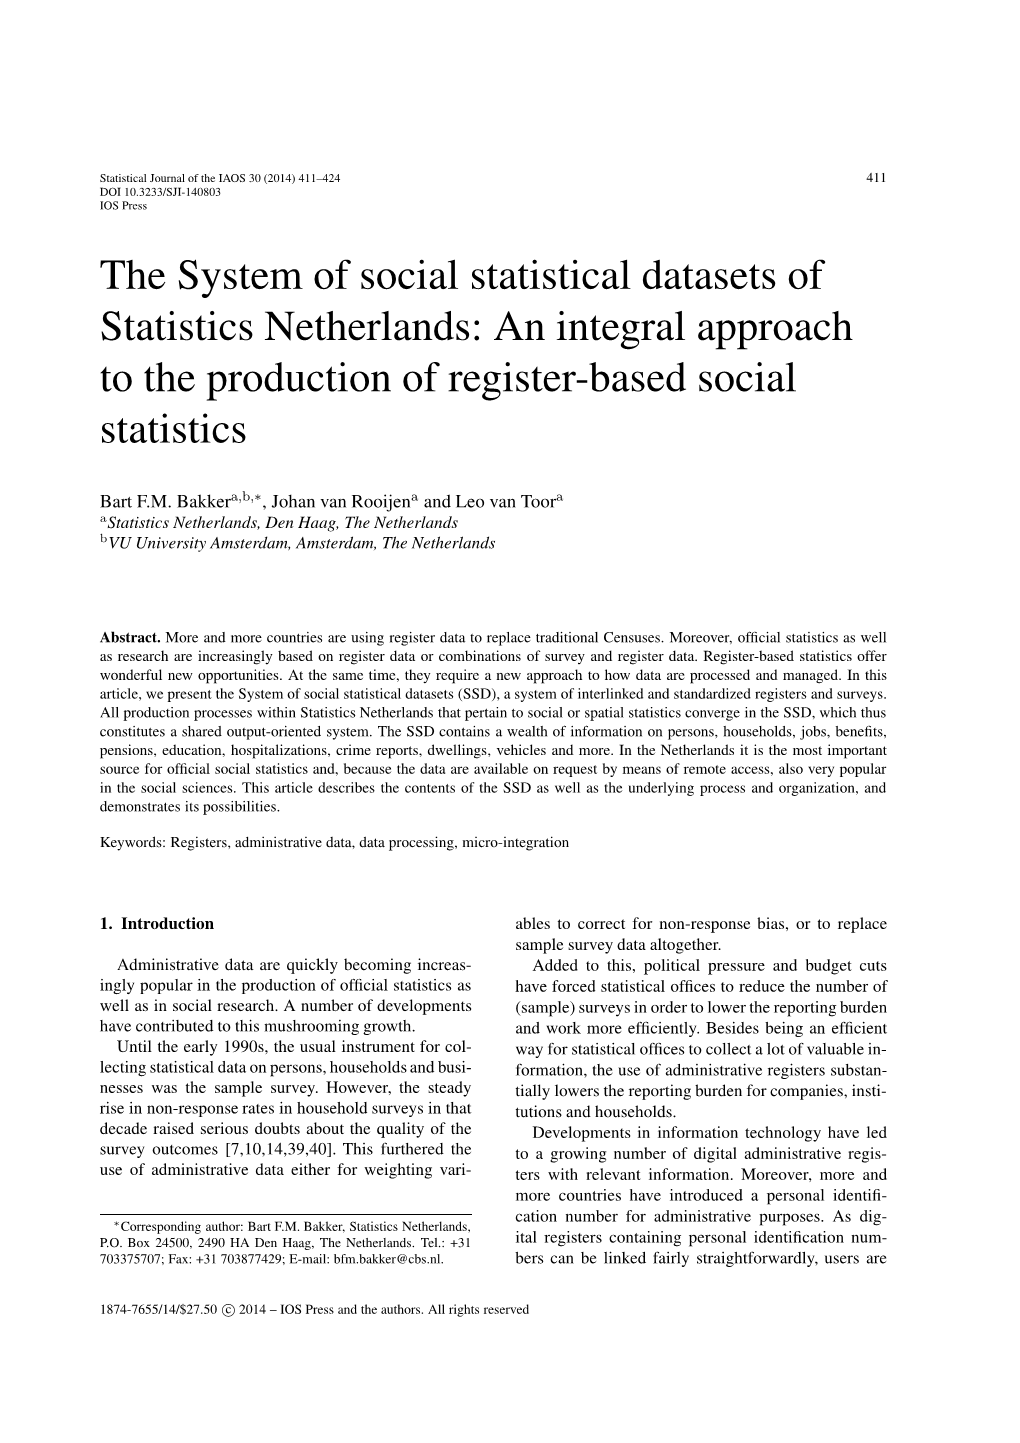 The System of Social Statistical Datasets of Statistics Netherlands: an Integral Approach to the Production of Register-Based Social Statistics